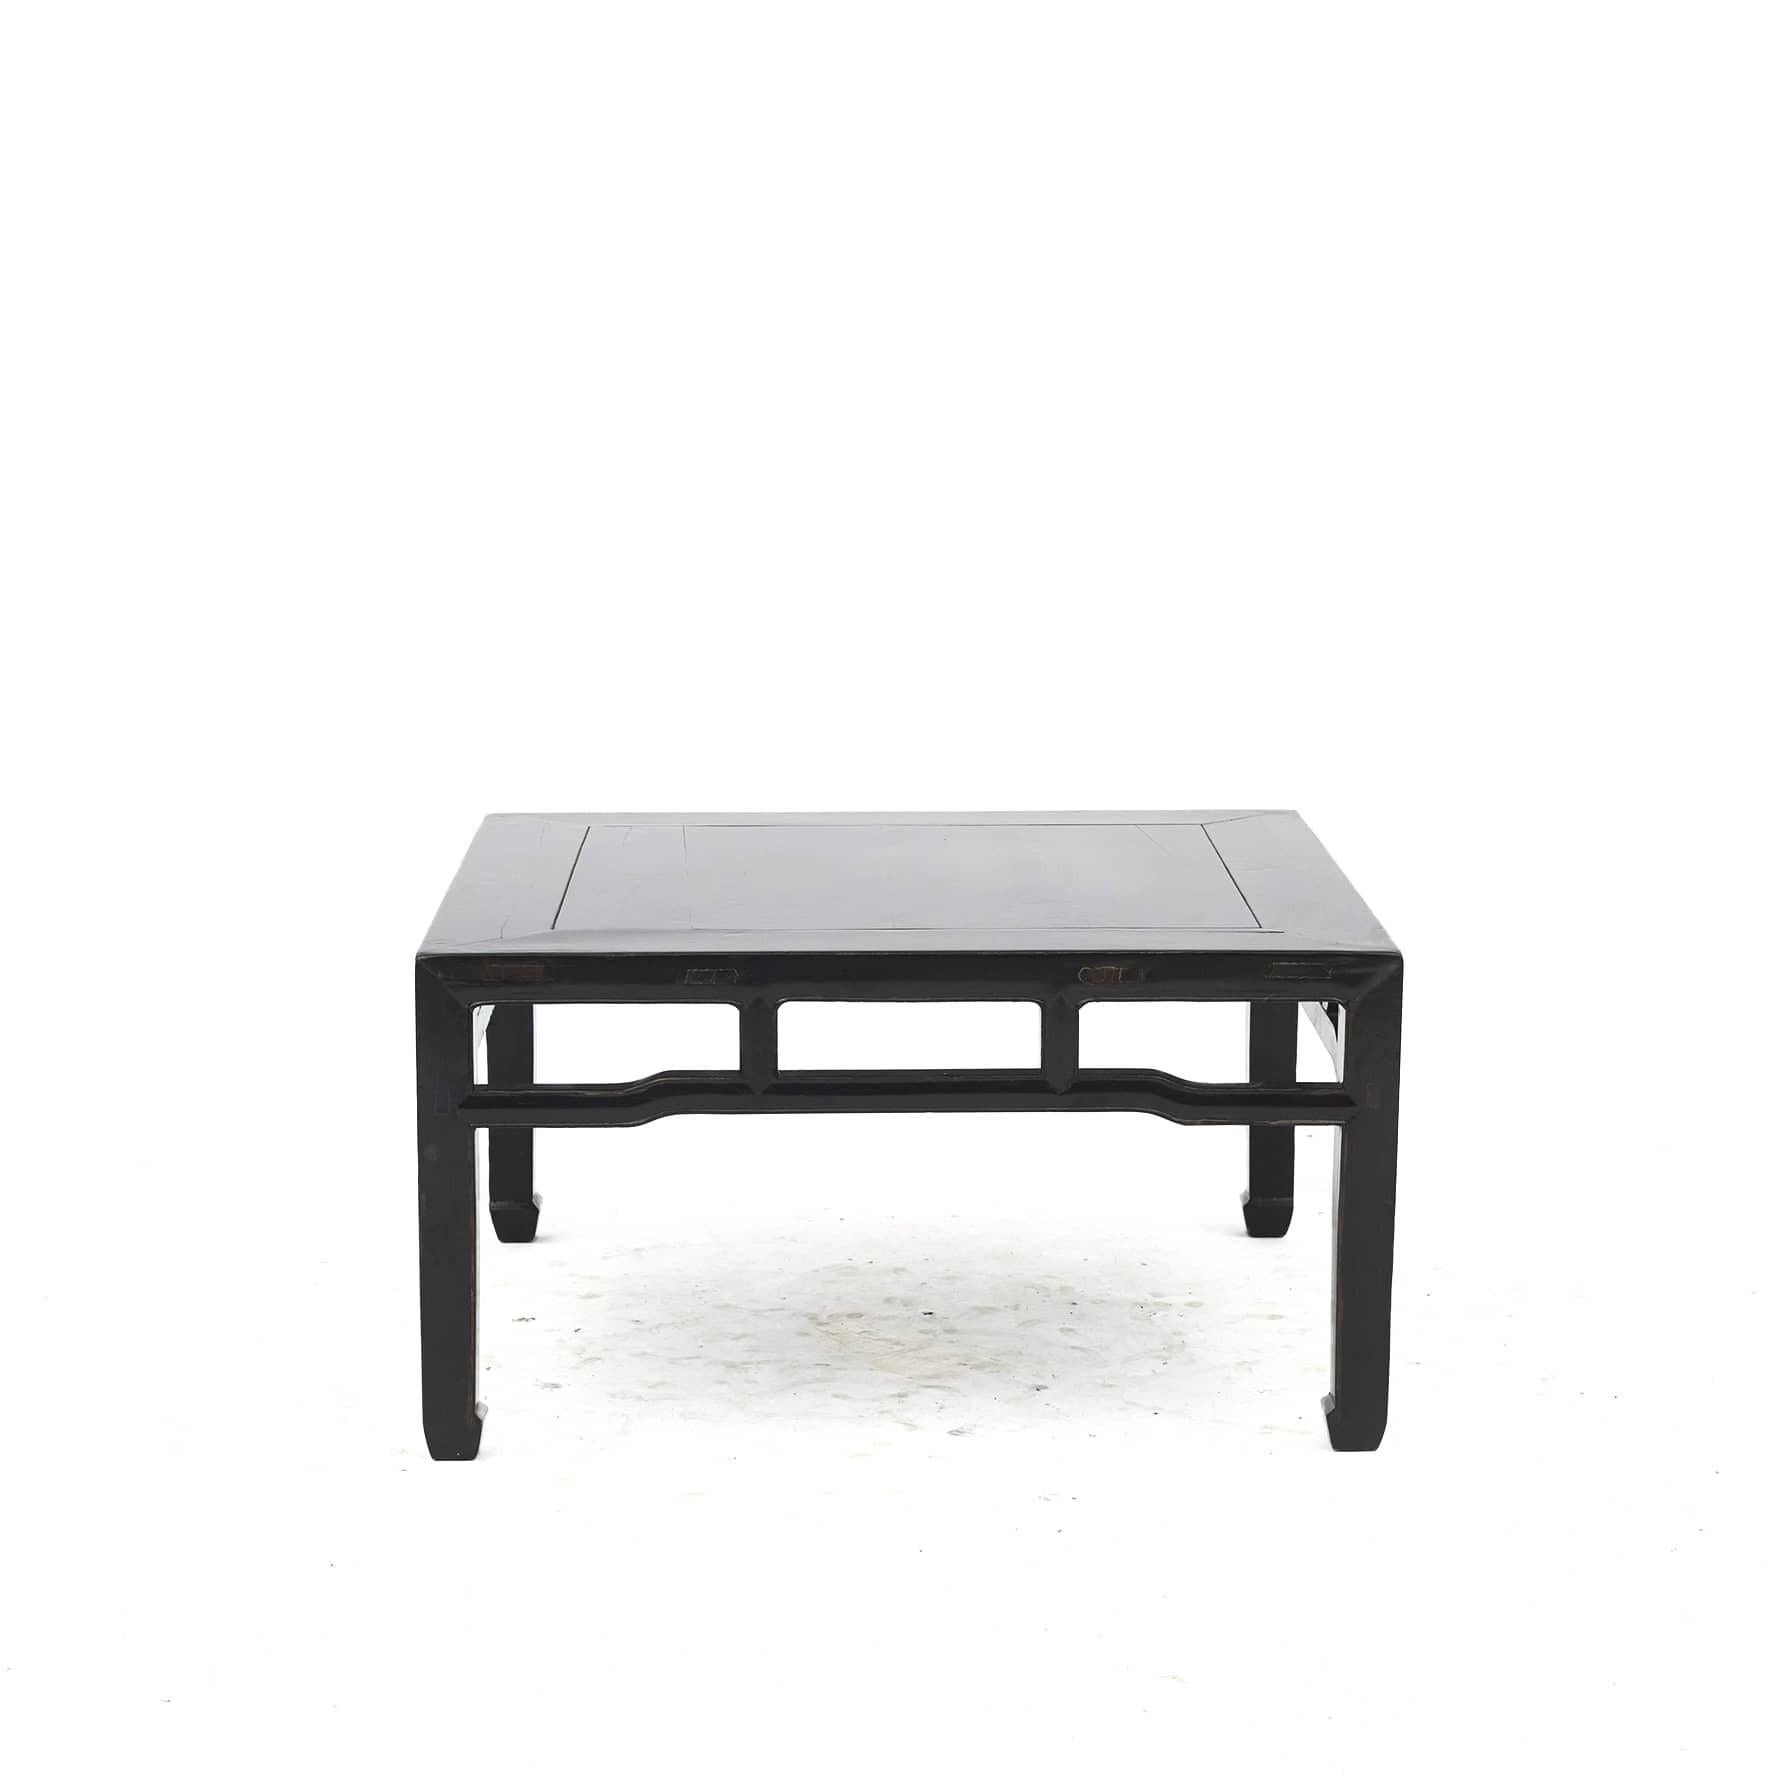 Ming Black Lacquer Coffee Table, 1860 - 1880